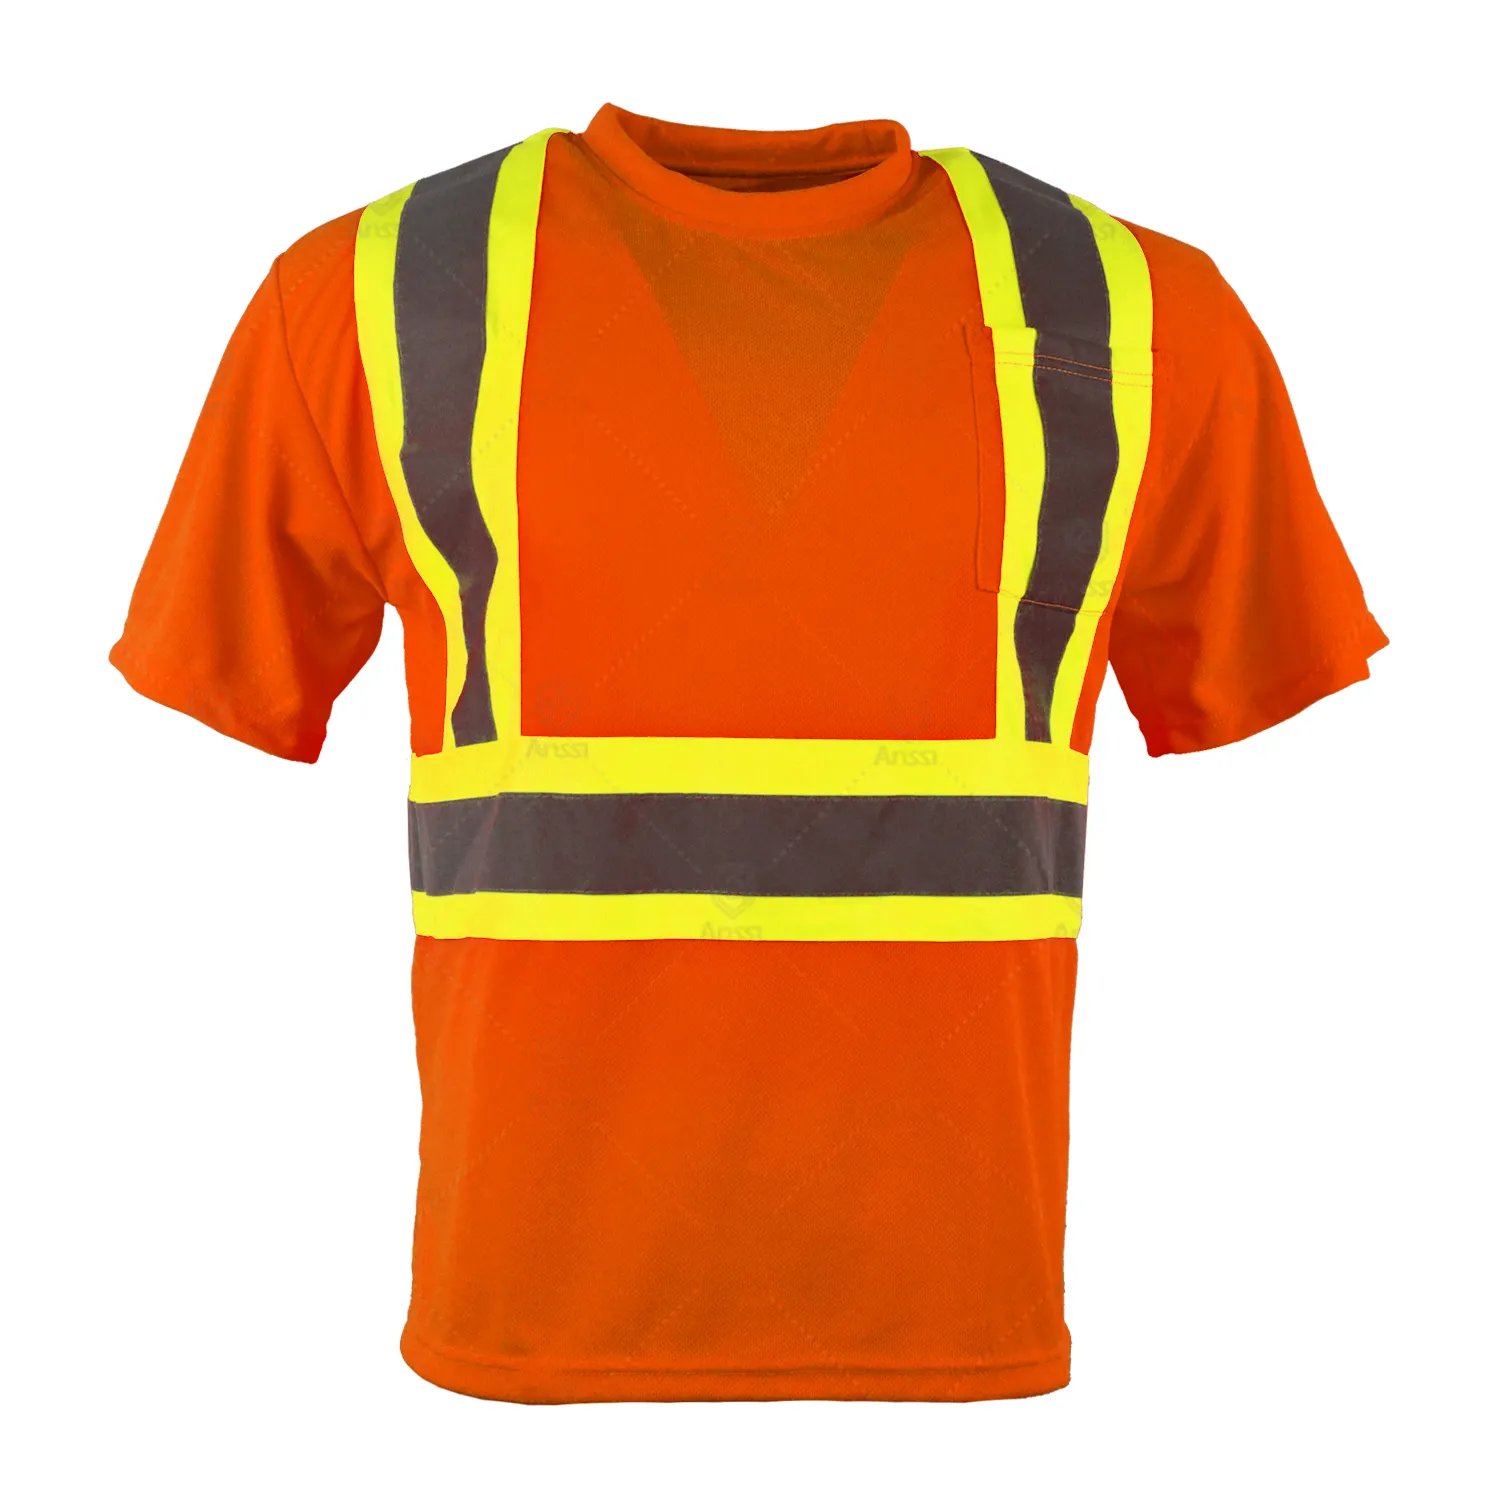 Safety Shirts Clothing Cheap 100% Cotton With Short Sleeves Reflective Tape Safety Shirt With Pocket